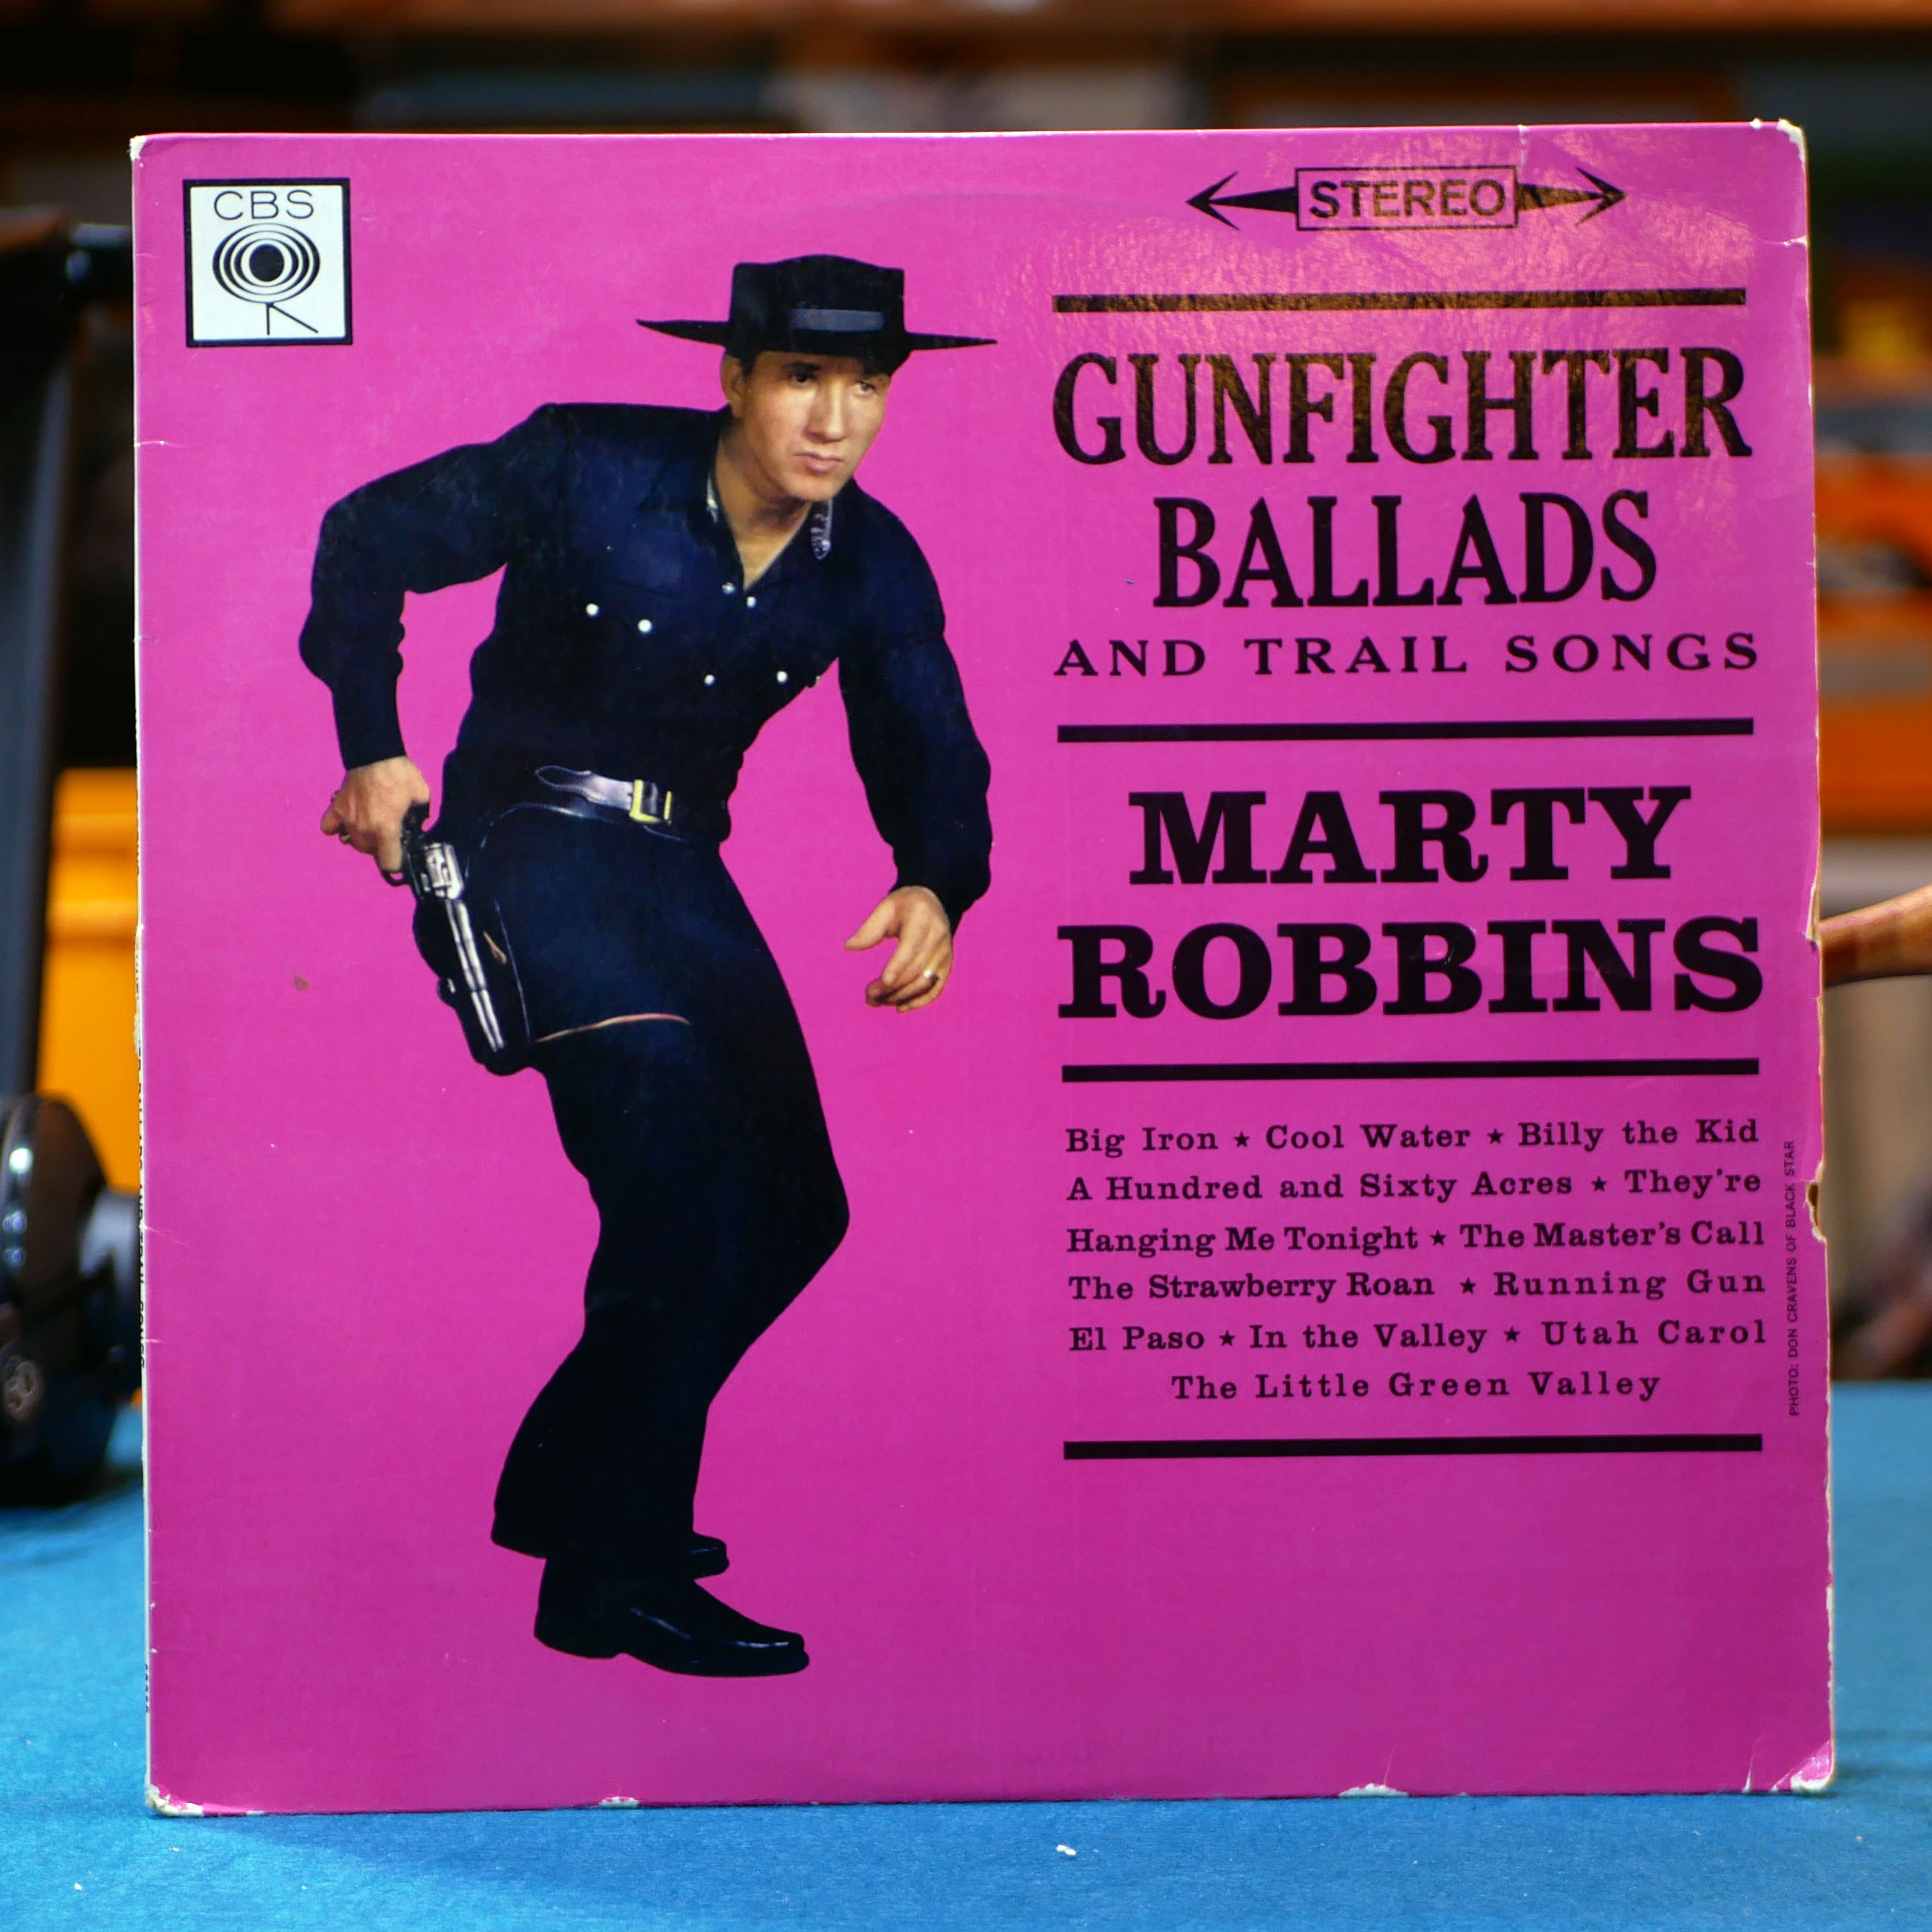 Marty Robbins – Gunfighter Ballads and Trail Songs [LP, 1959]